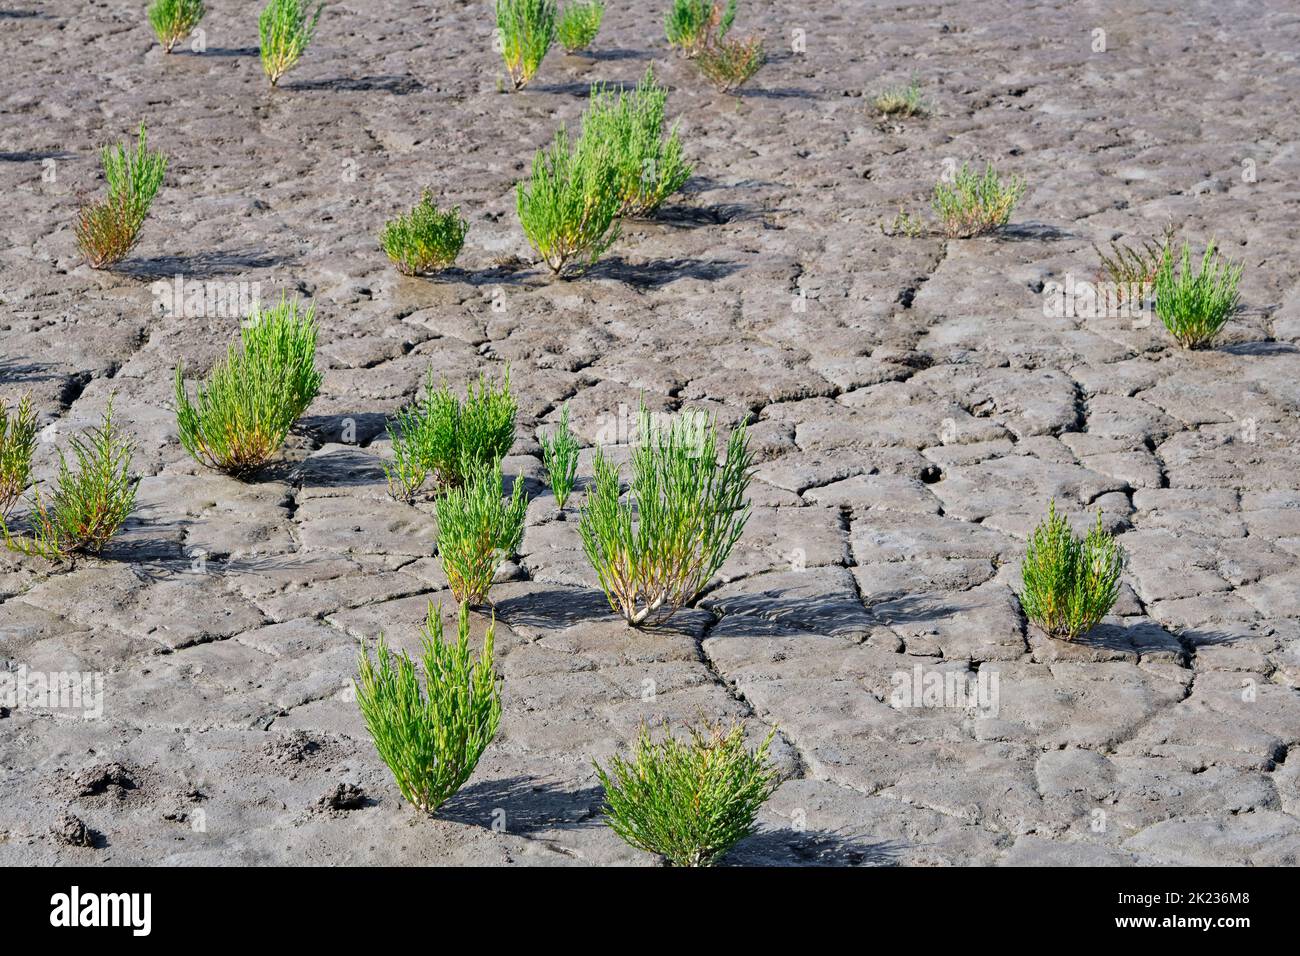 Green samphire or salicornia plants in cracked muddy clay at the seashore of the Wadden Sea The Netherlands at low tide. Stock Photo